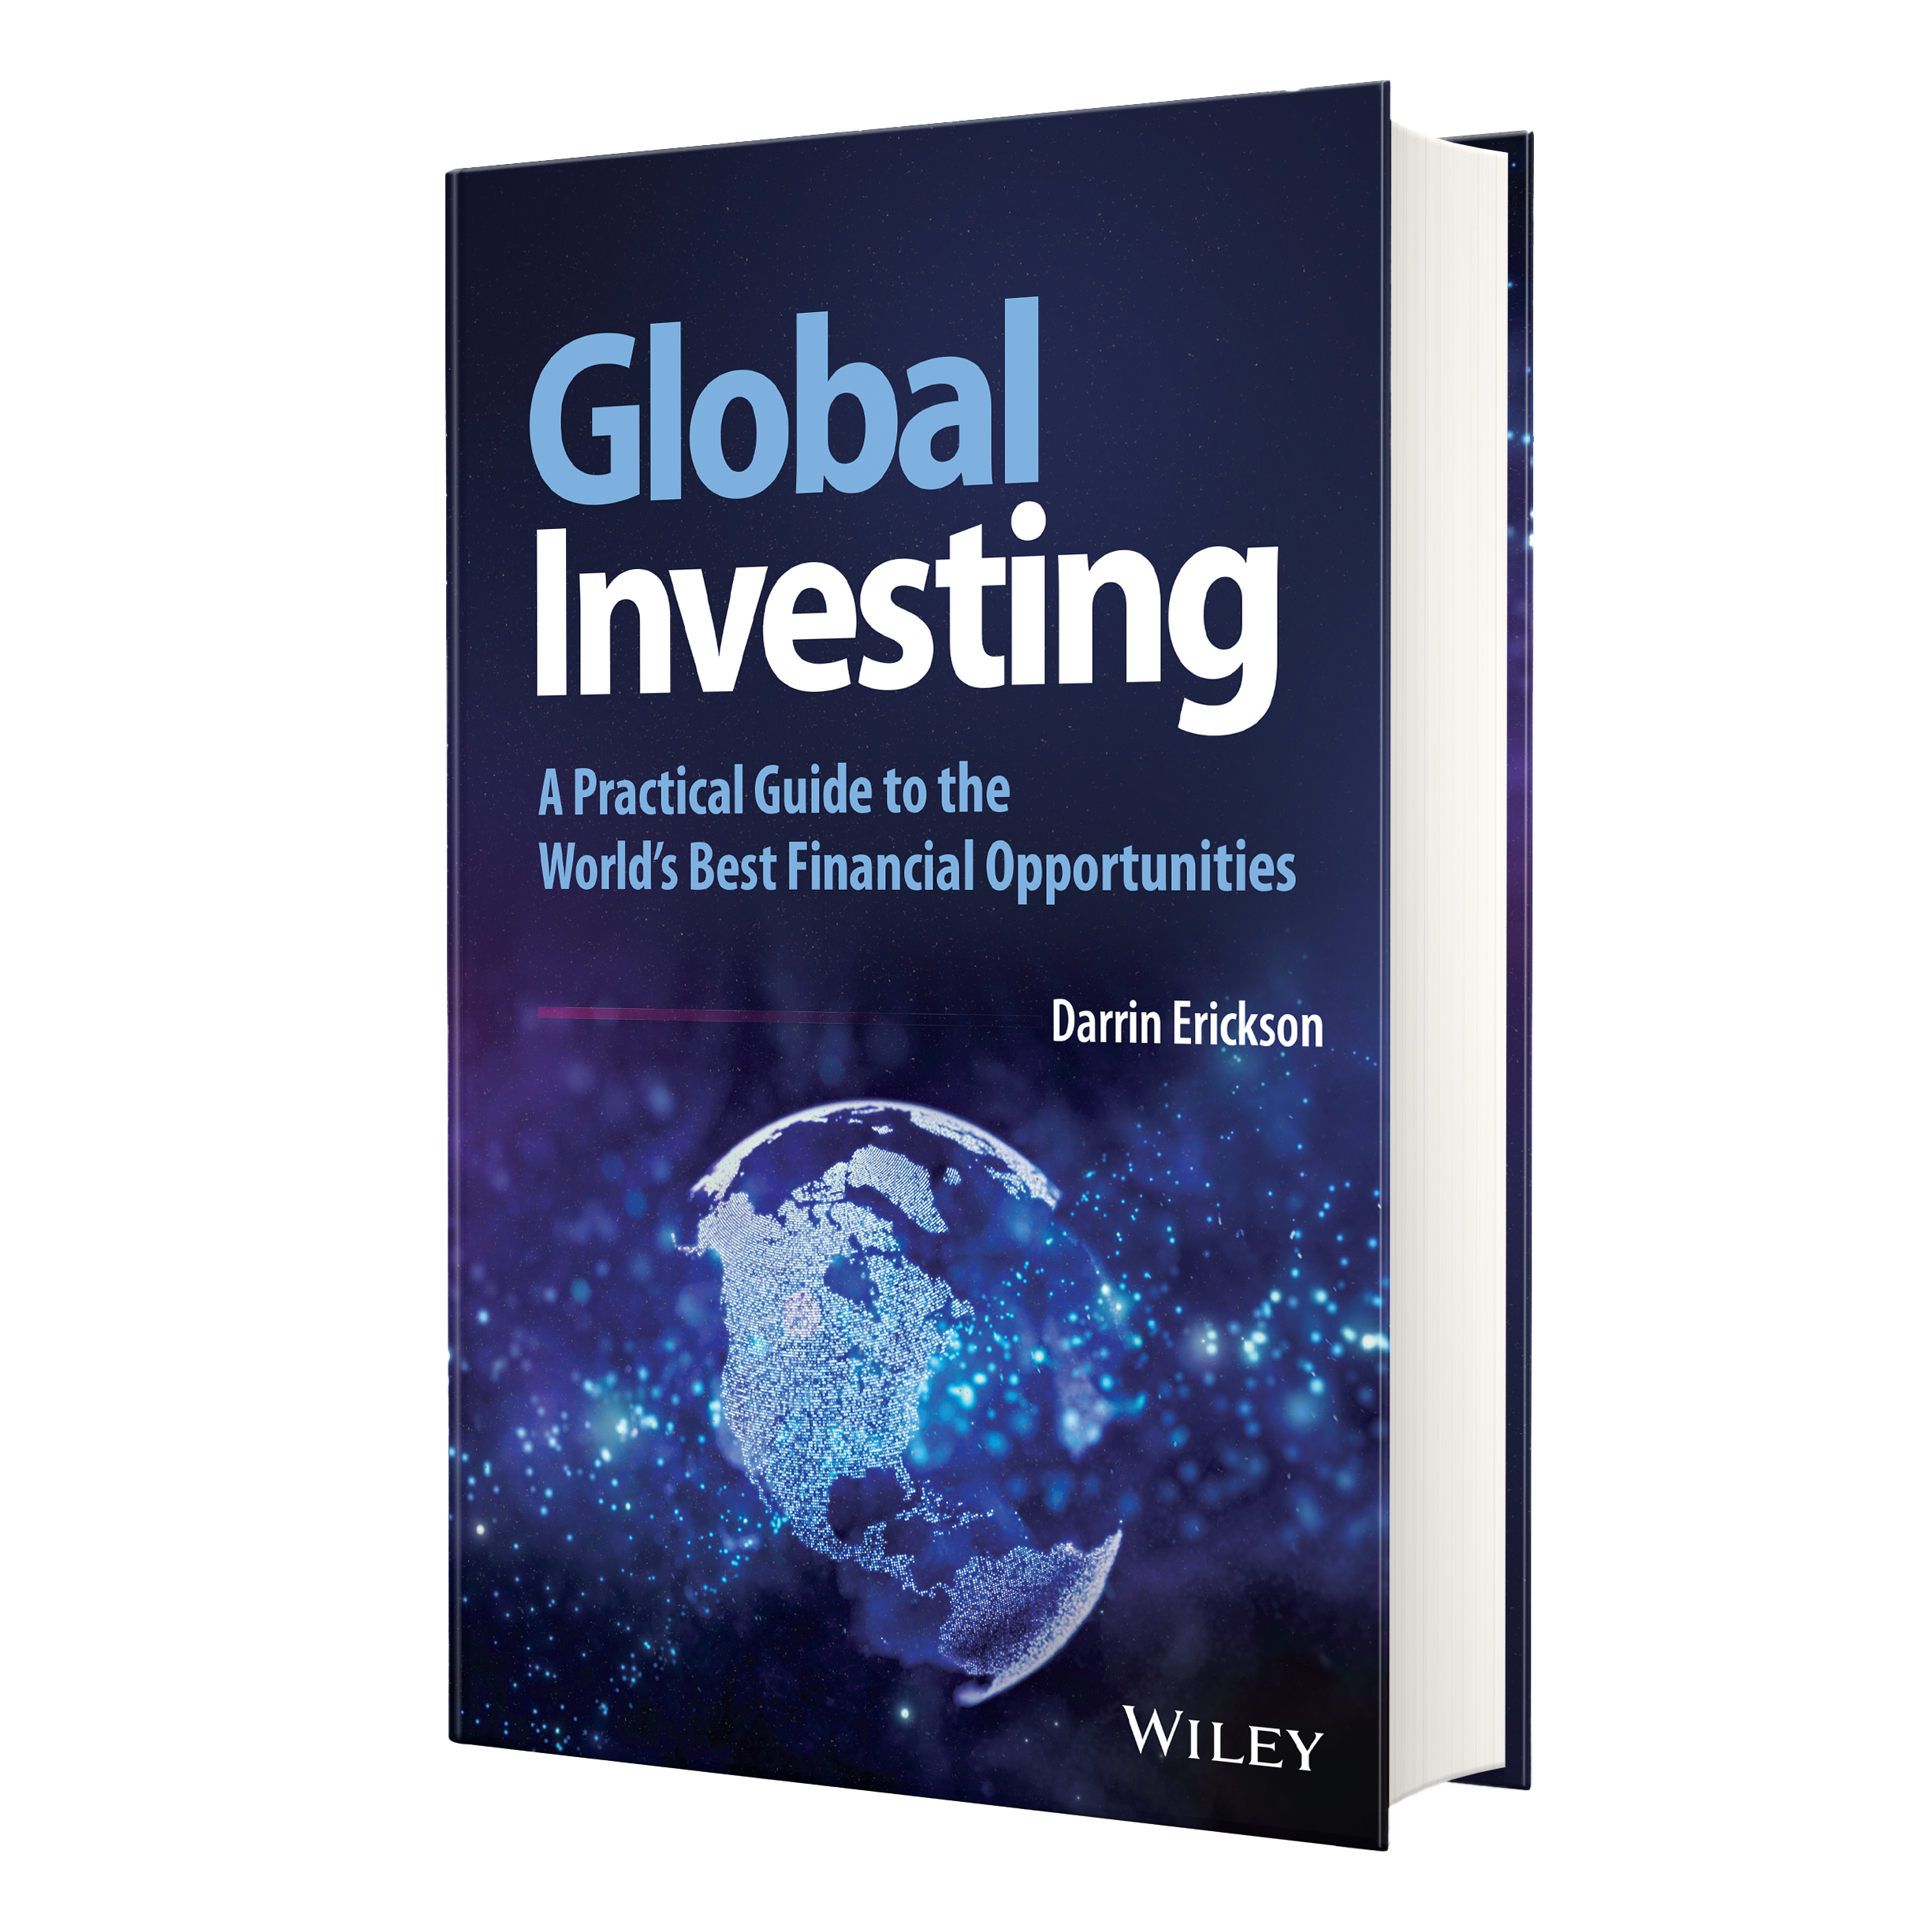 https://vpinvestments.blob.core.windows.net/images/Global-Investing.png